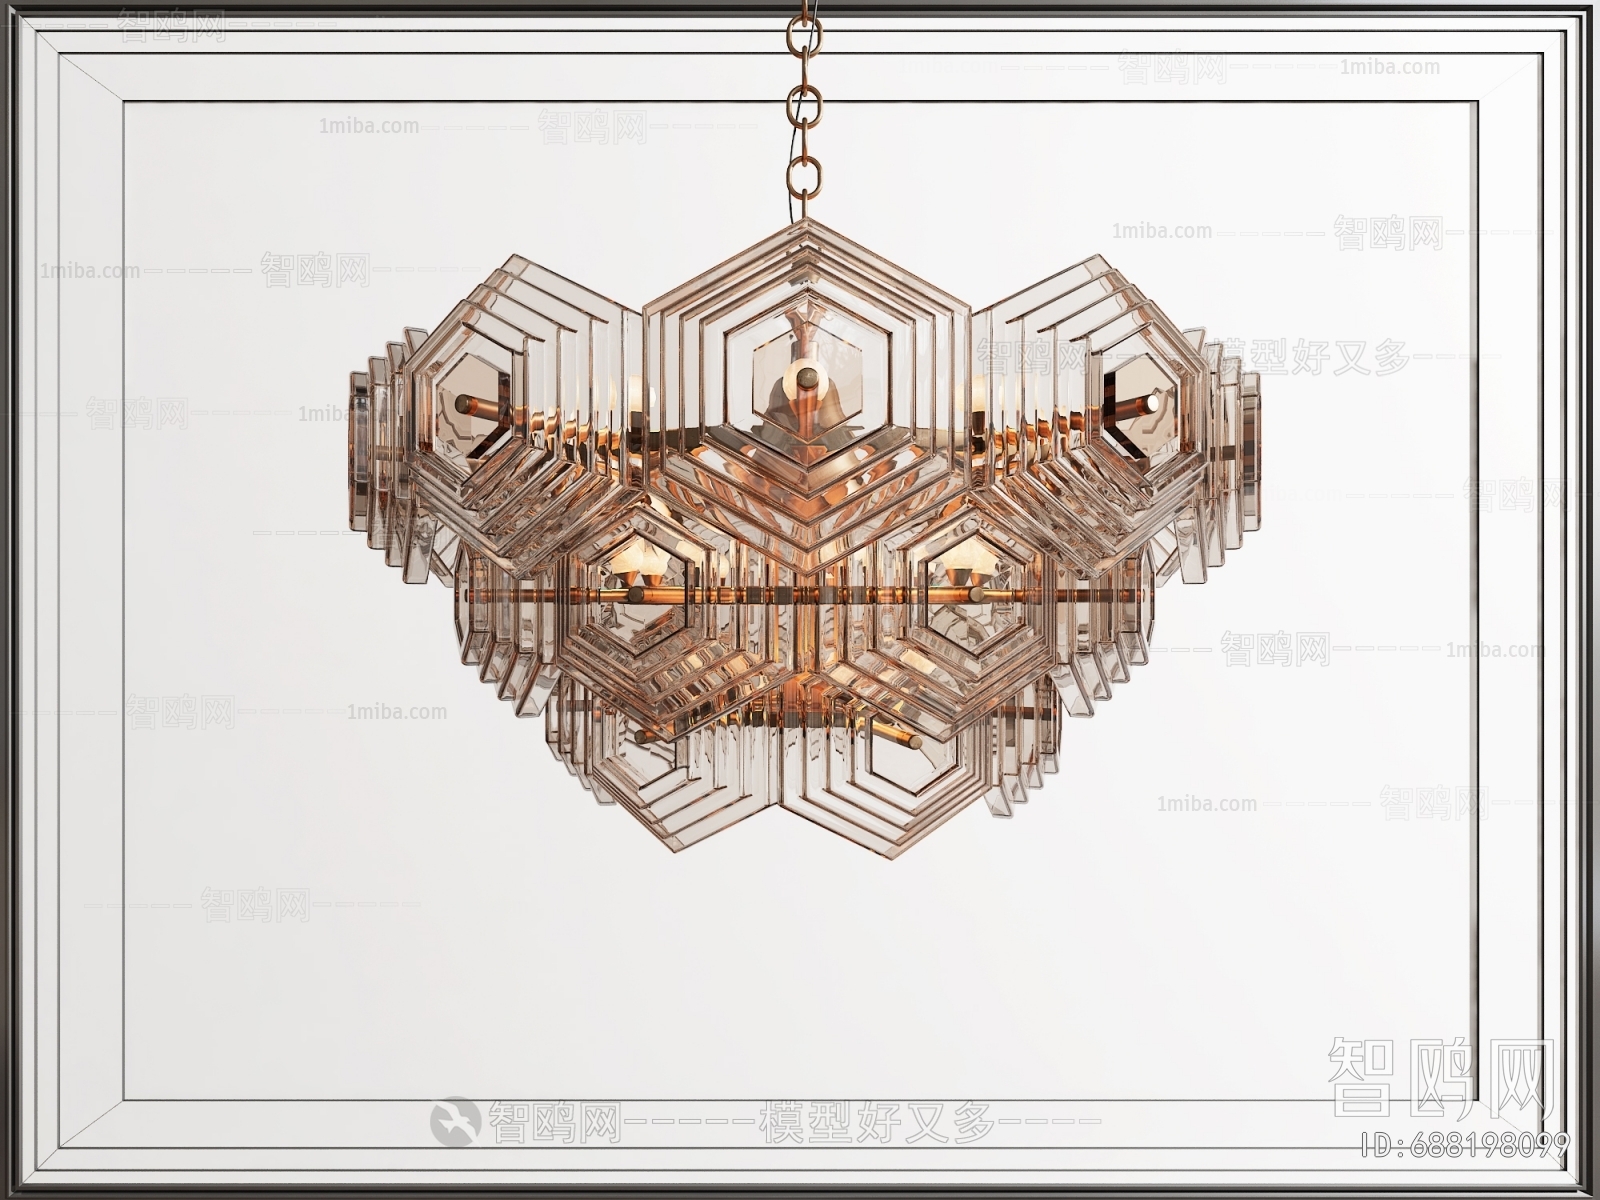 French Style Droplight